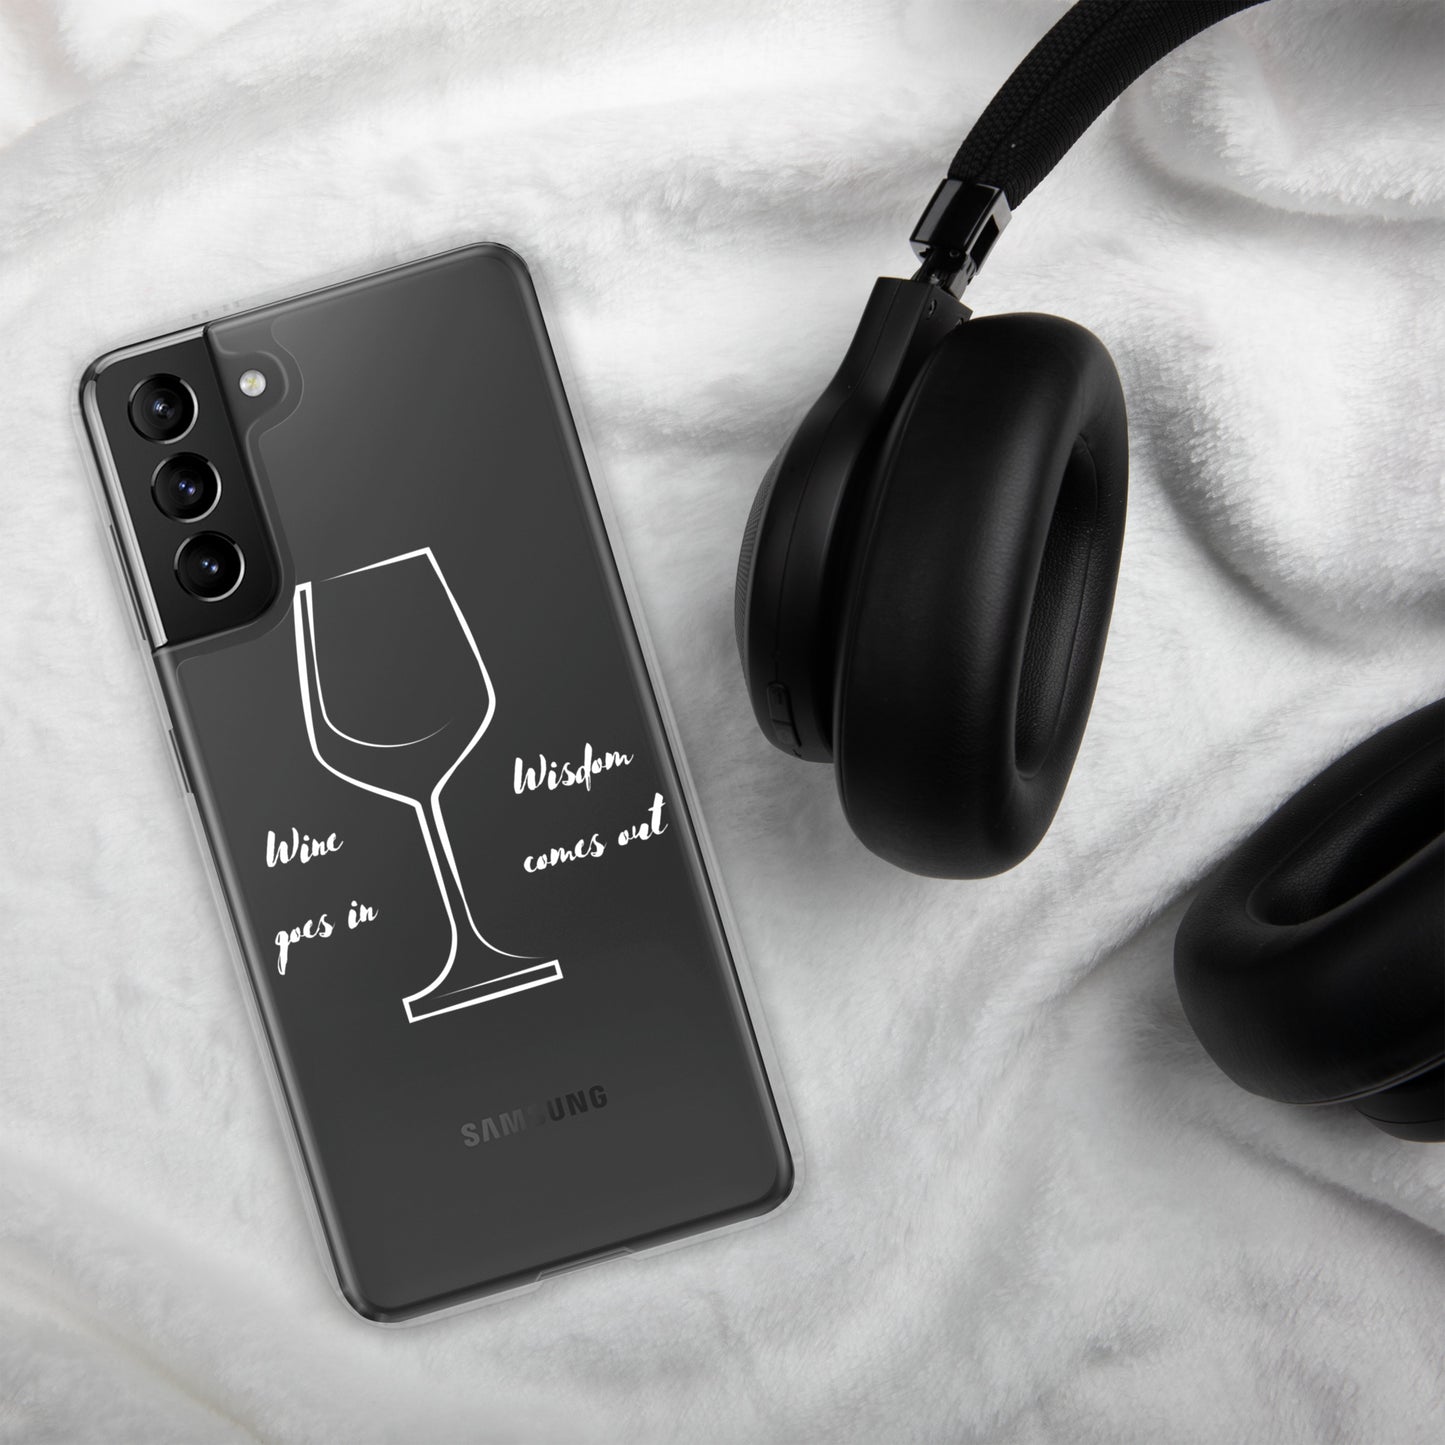 Wine goes in Wisdom comes out - Samsung Case